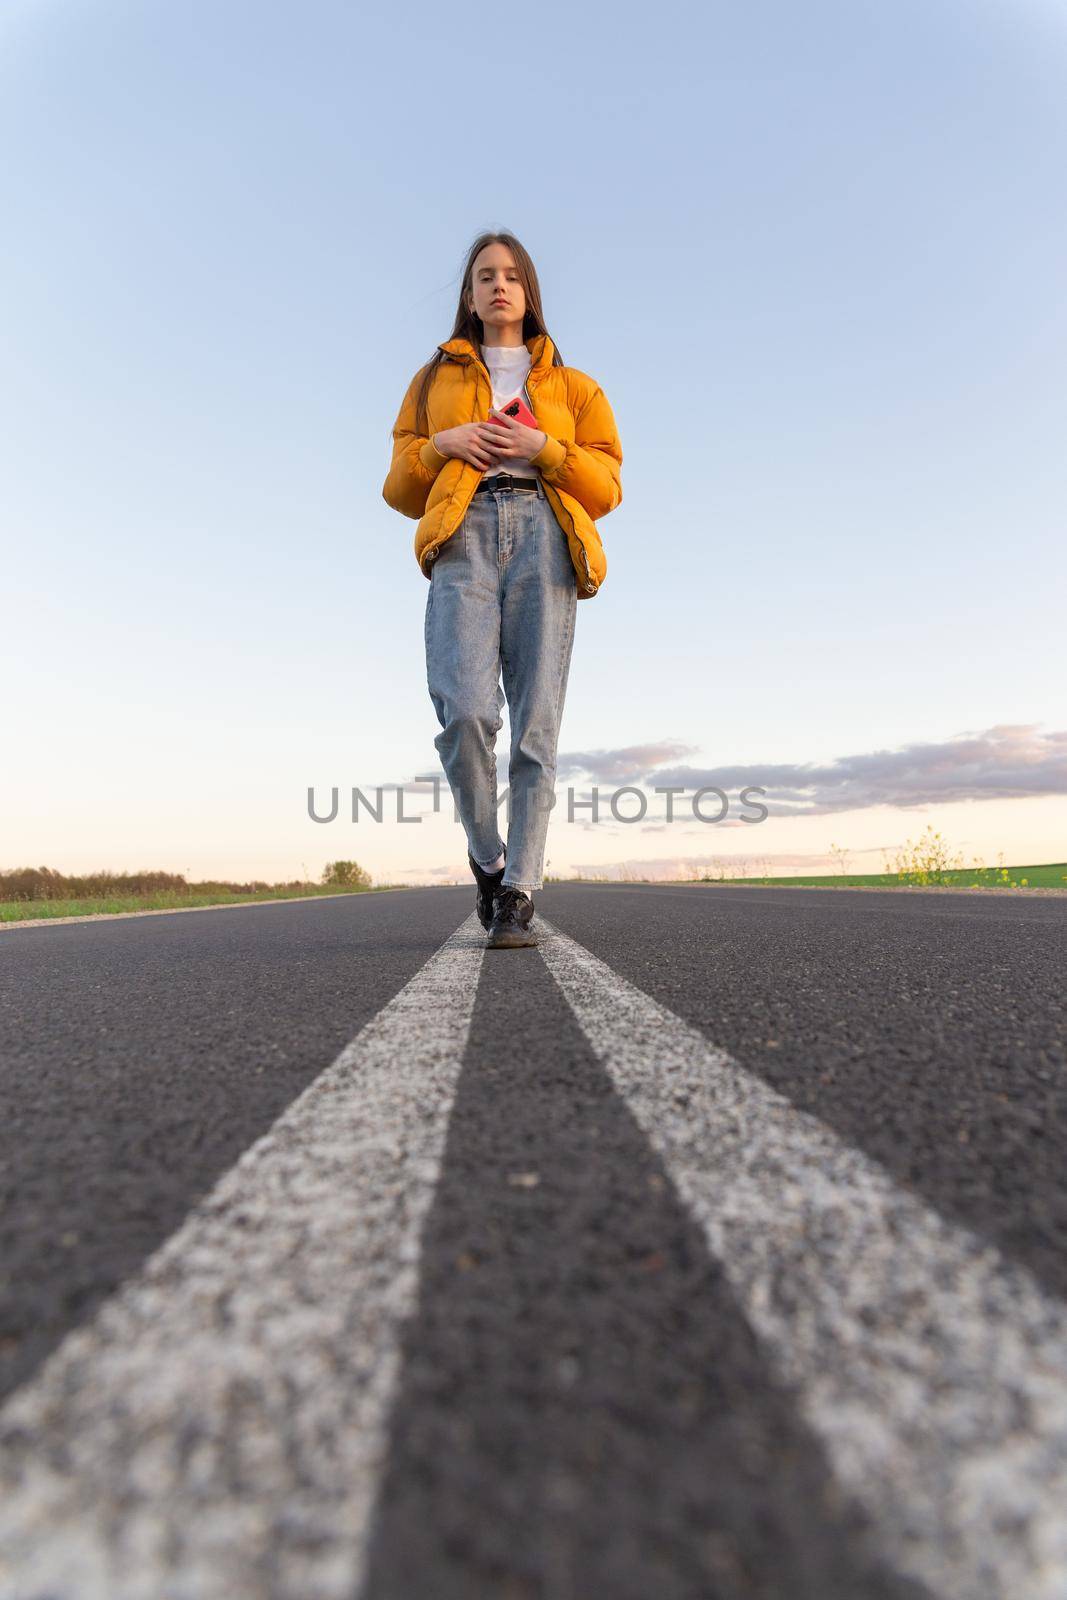 Cool modern teen girl poses on a lonely road while the sky background looks blue with clouds at sunset.